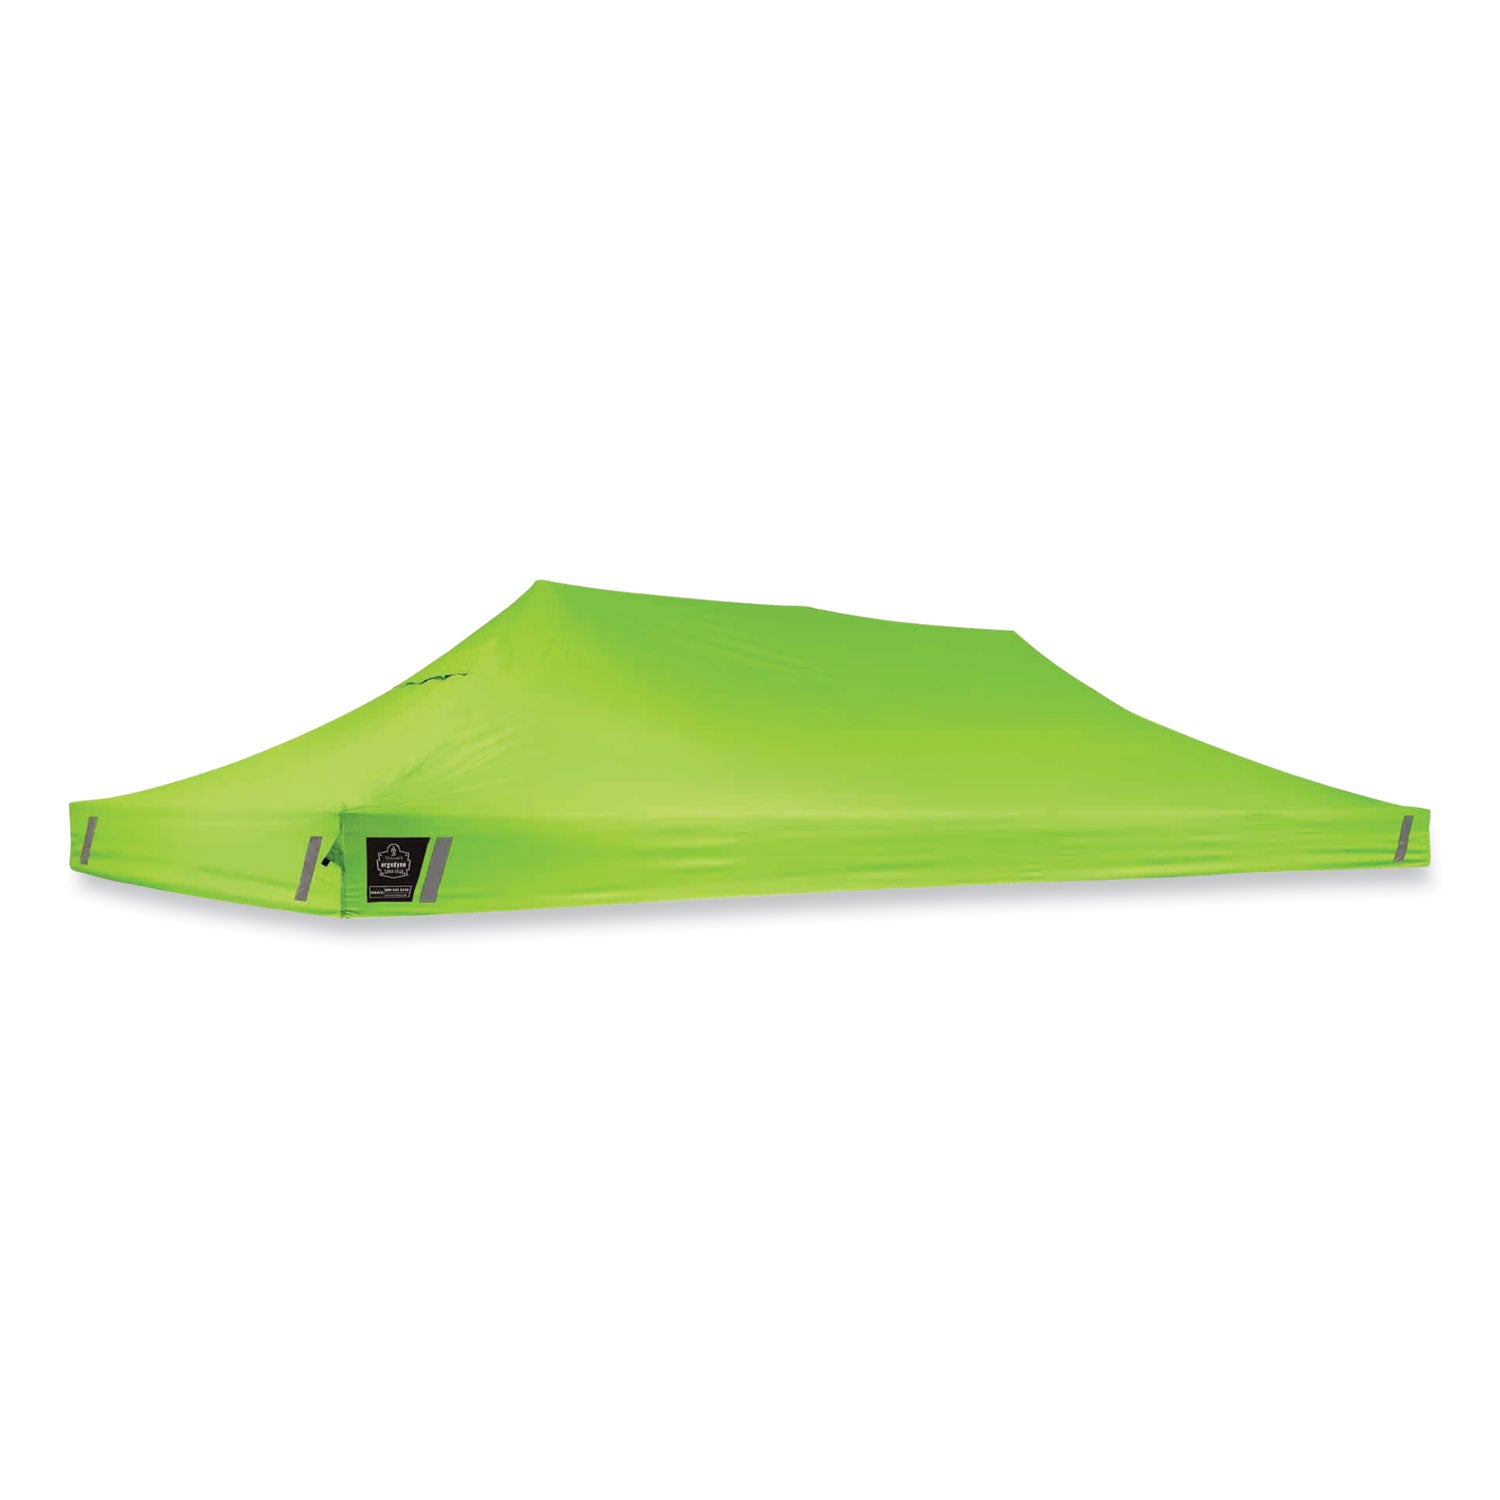 shax-6015c-replacement-pop-up-tent-canopy-for-6015-10-ft-x-20-ft-polyester-lime-ships-in-1-3-business-days_ego12916 - 1